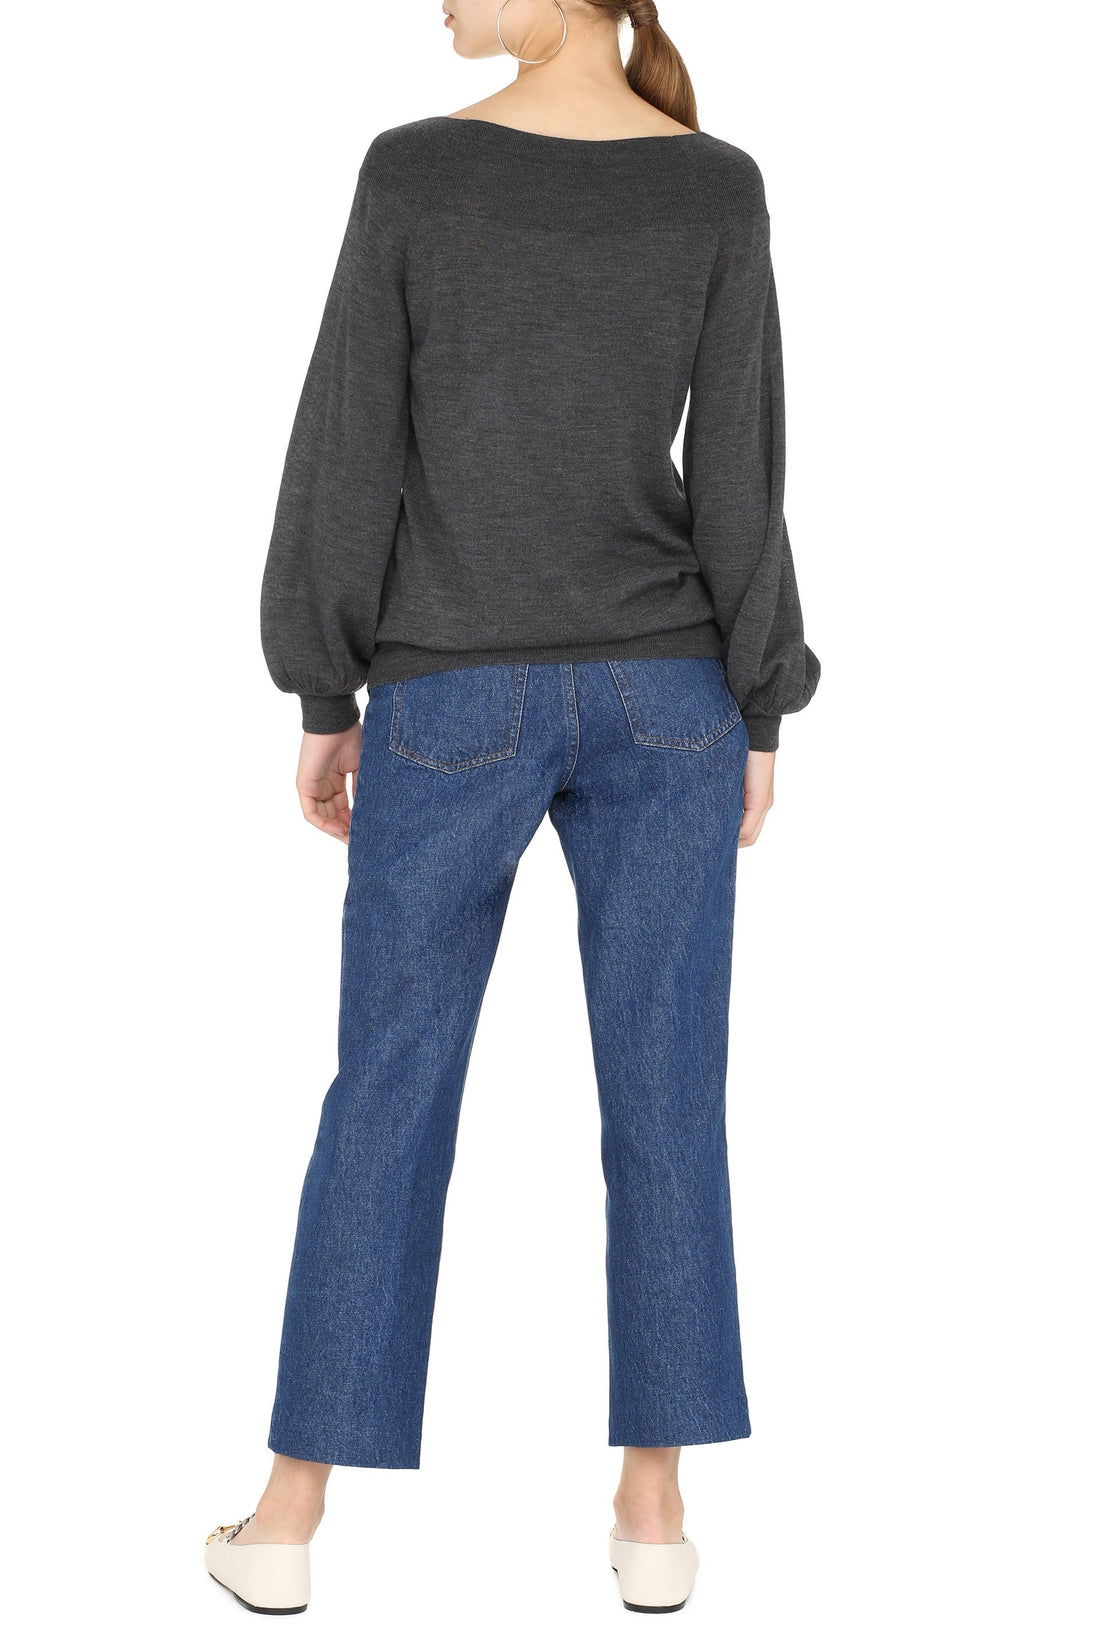 Parosh-OUTLET-SALE-Wool and cashmere pullover-ARCHIVIST